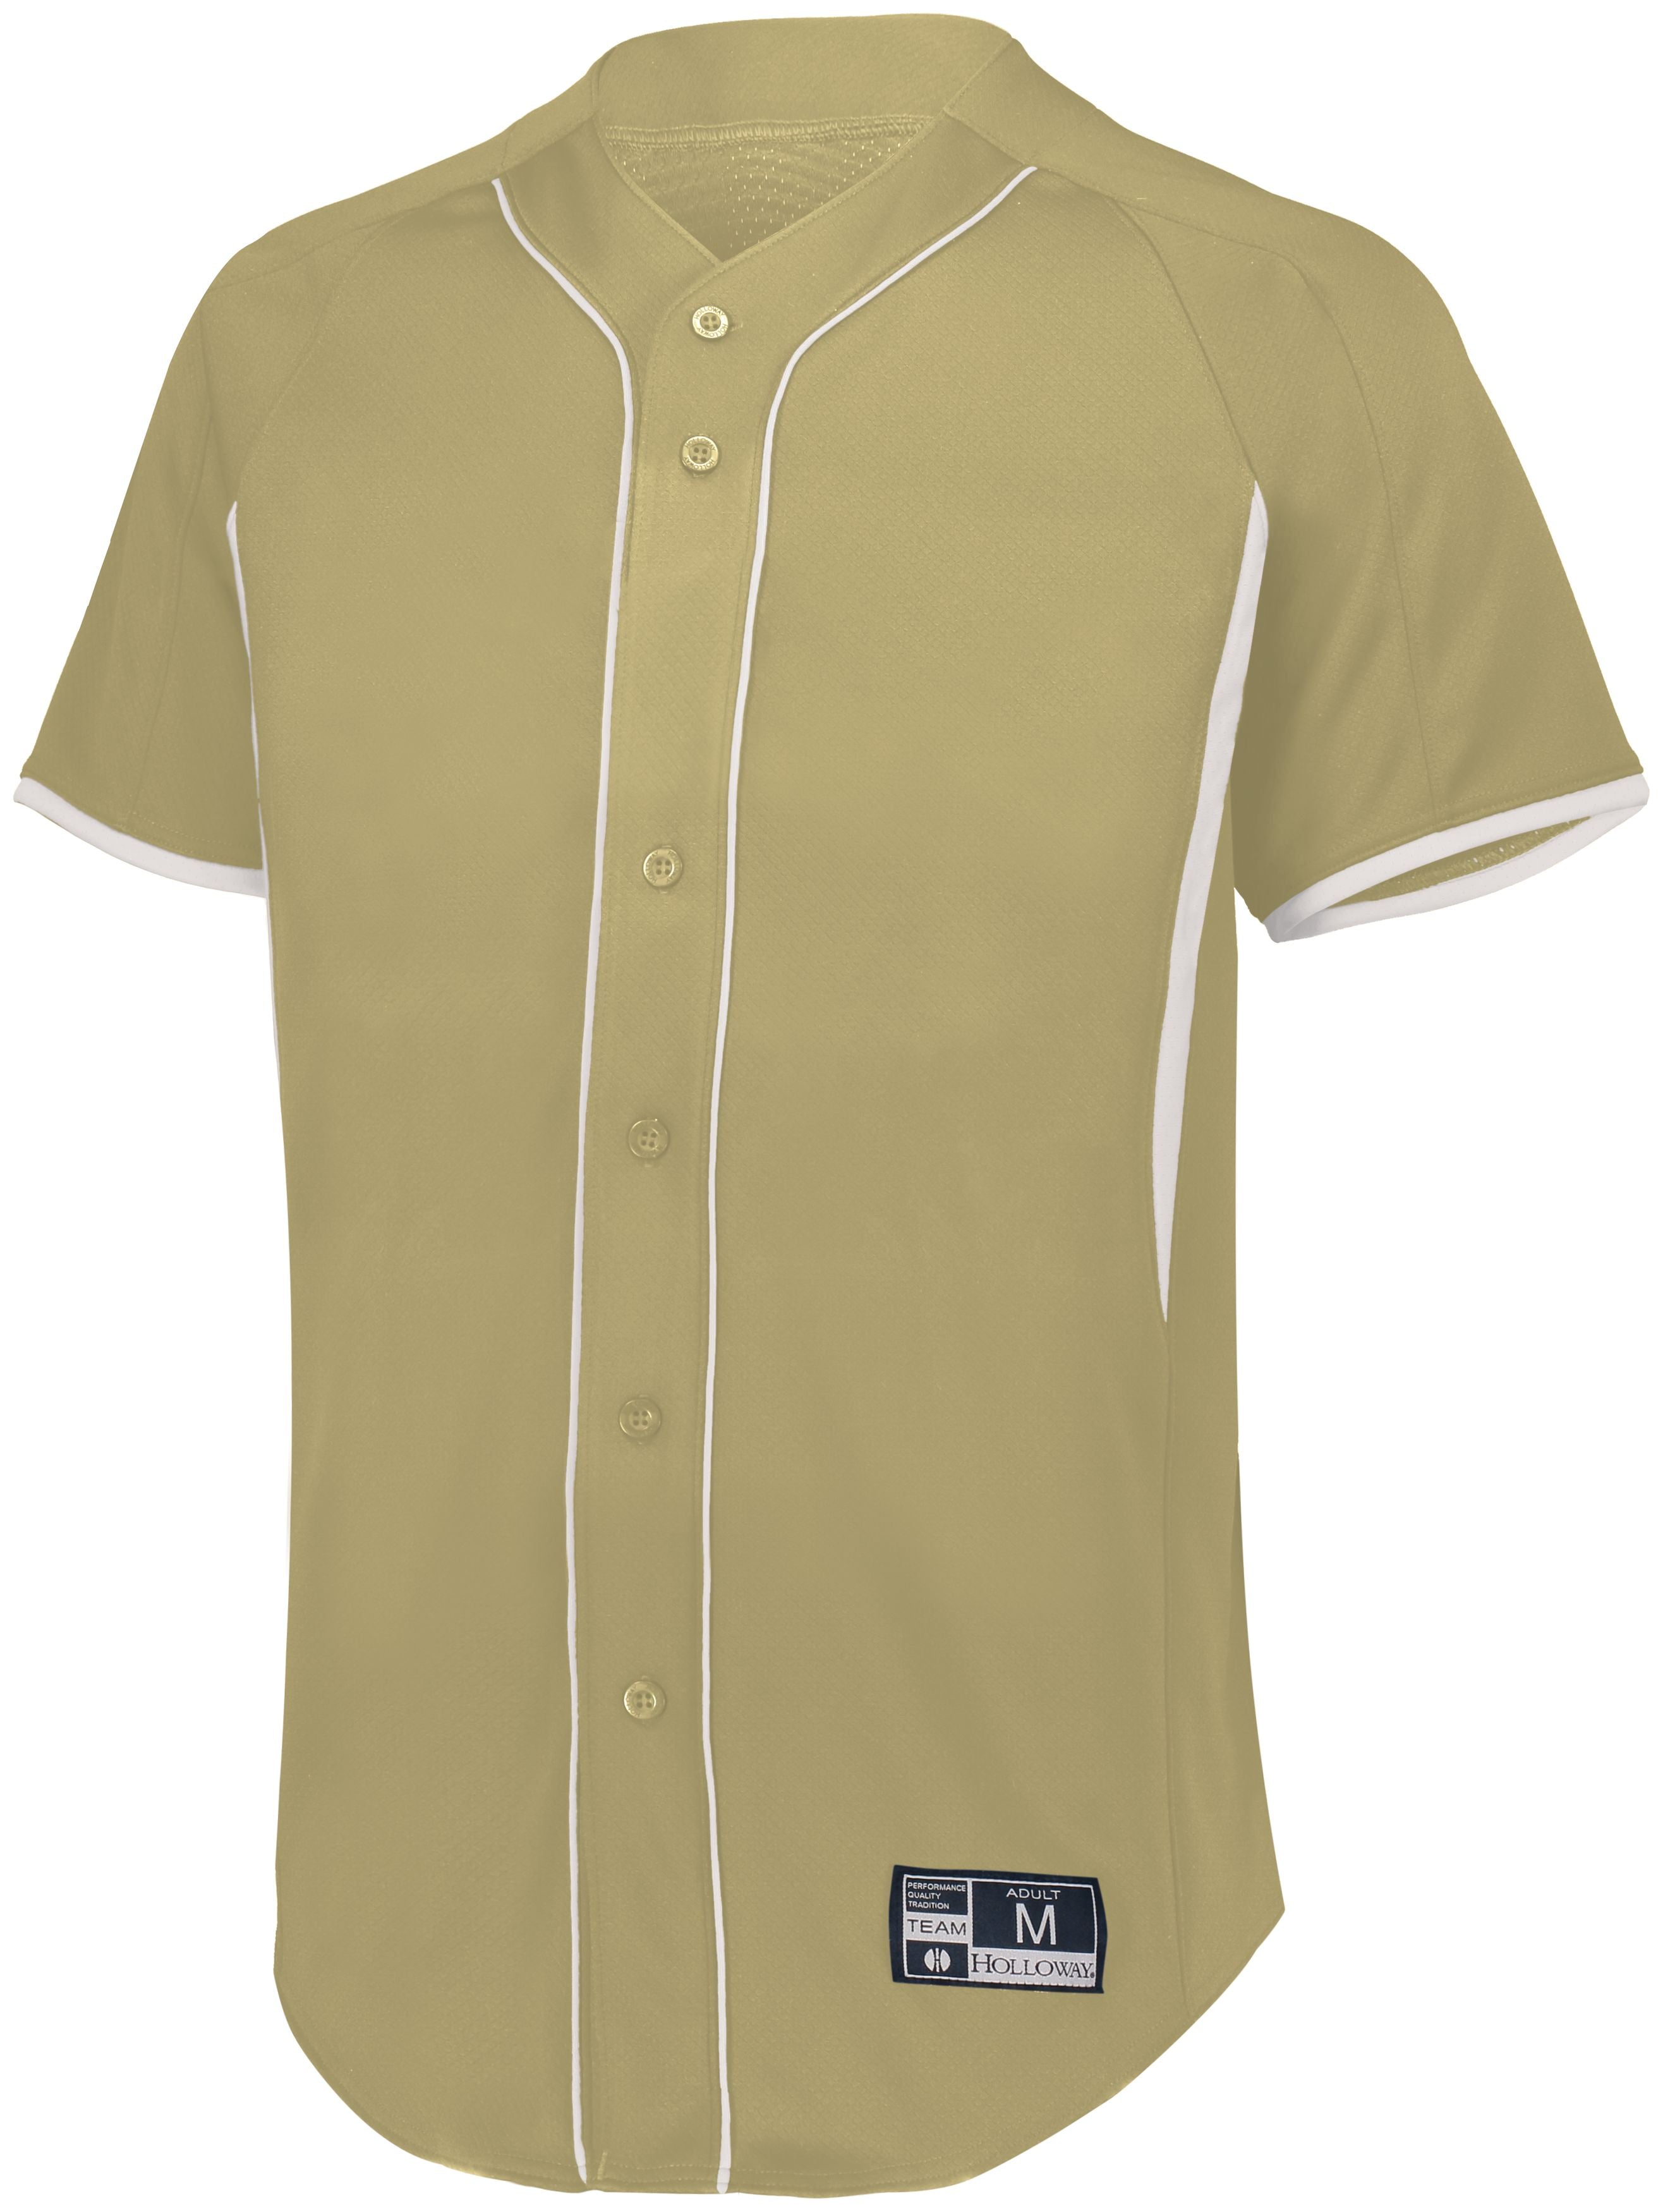 Holloway Game7 Full-Button Baseball Jersey in Vegas Gold/White  -Part of the Adult, Adult-Jersey, Baseball, Holloway, Shirts, All-Sports, All-Sports-1 product lines at KanaleyCreations.com